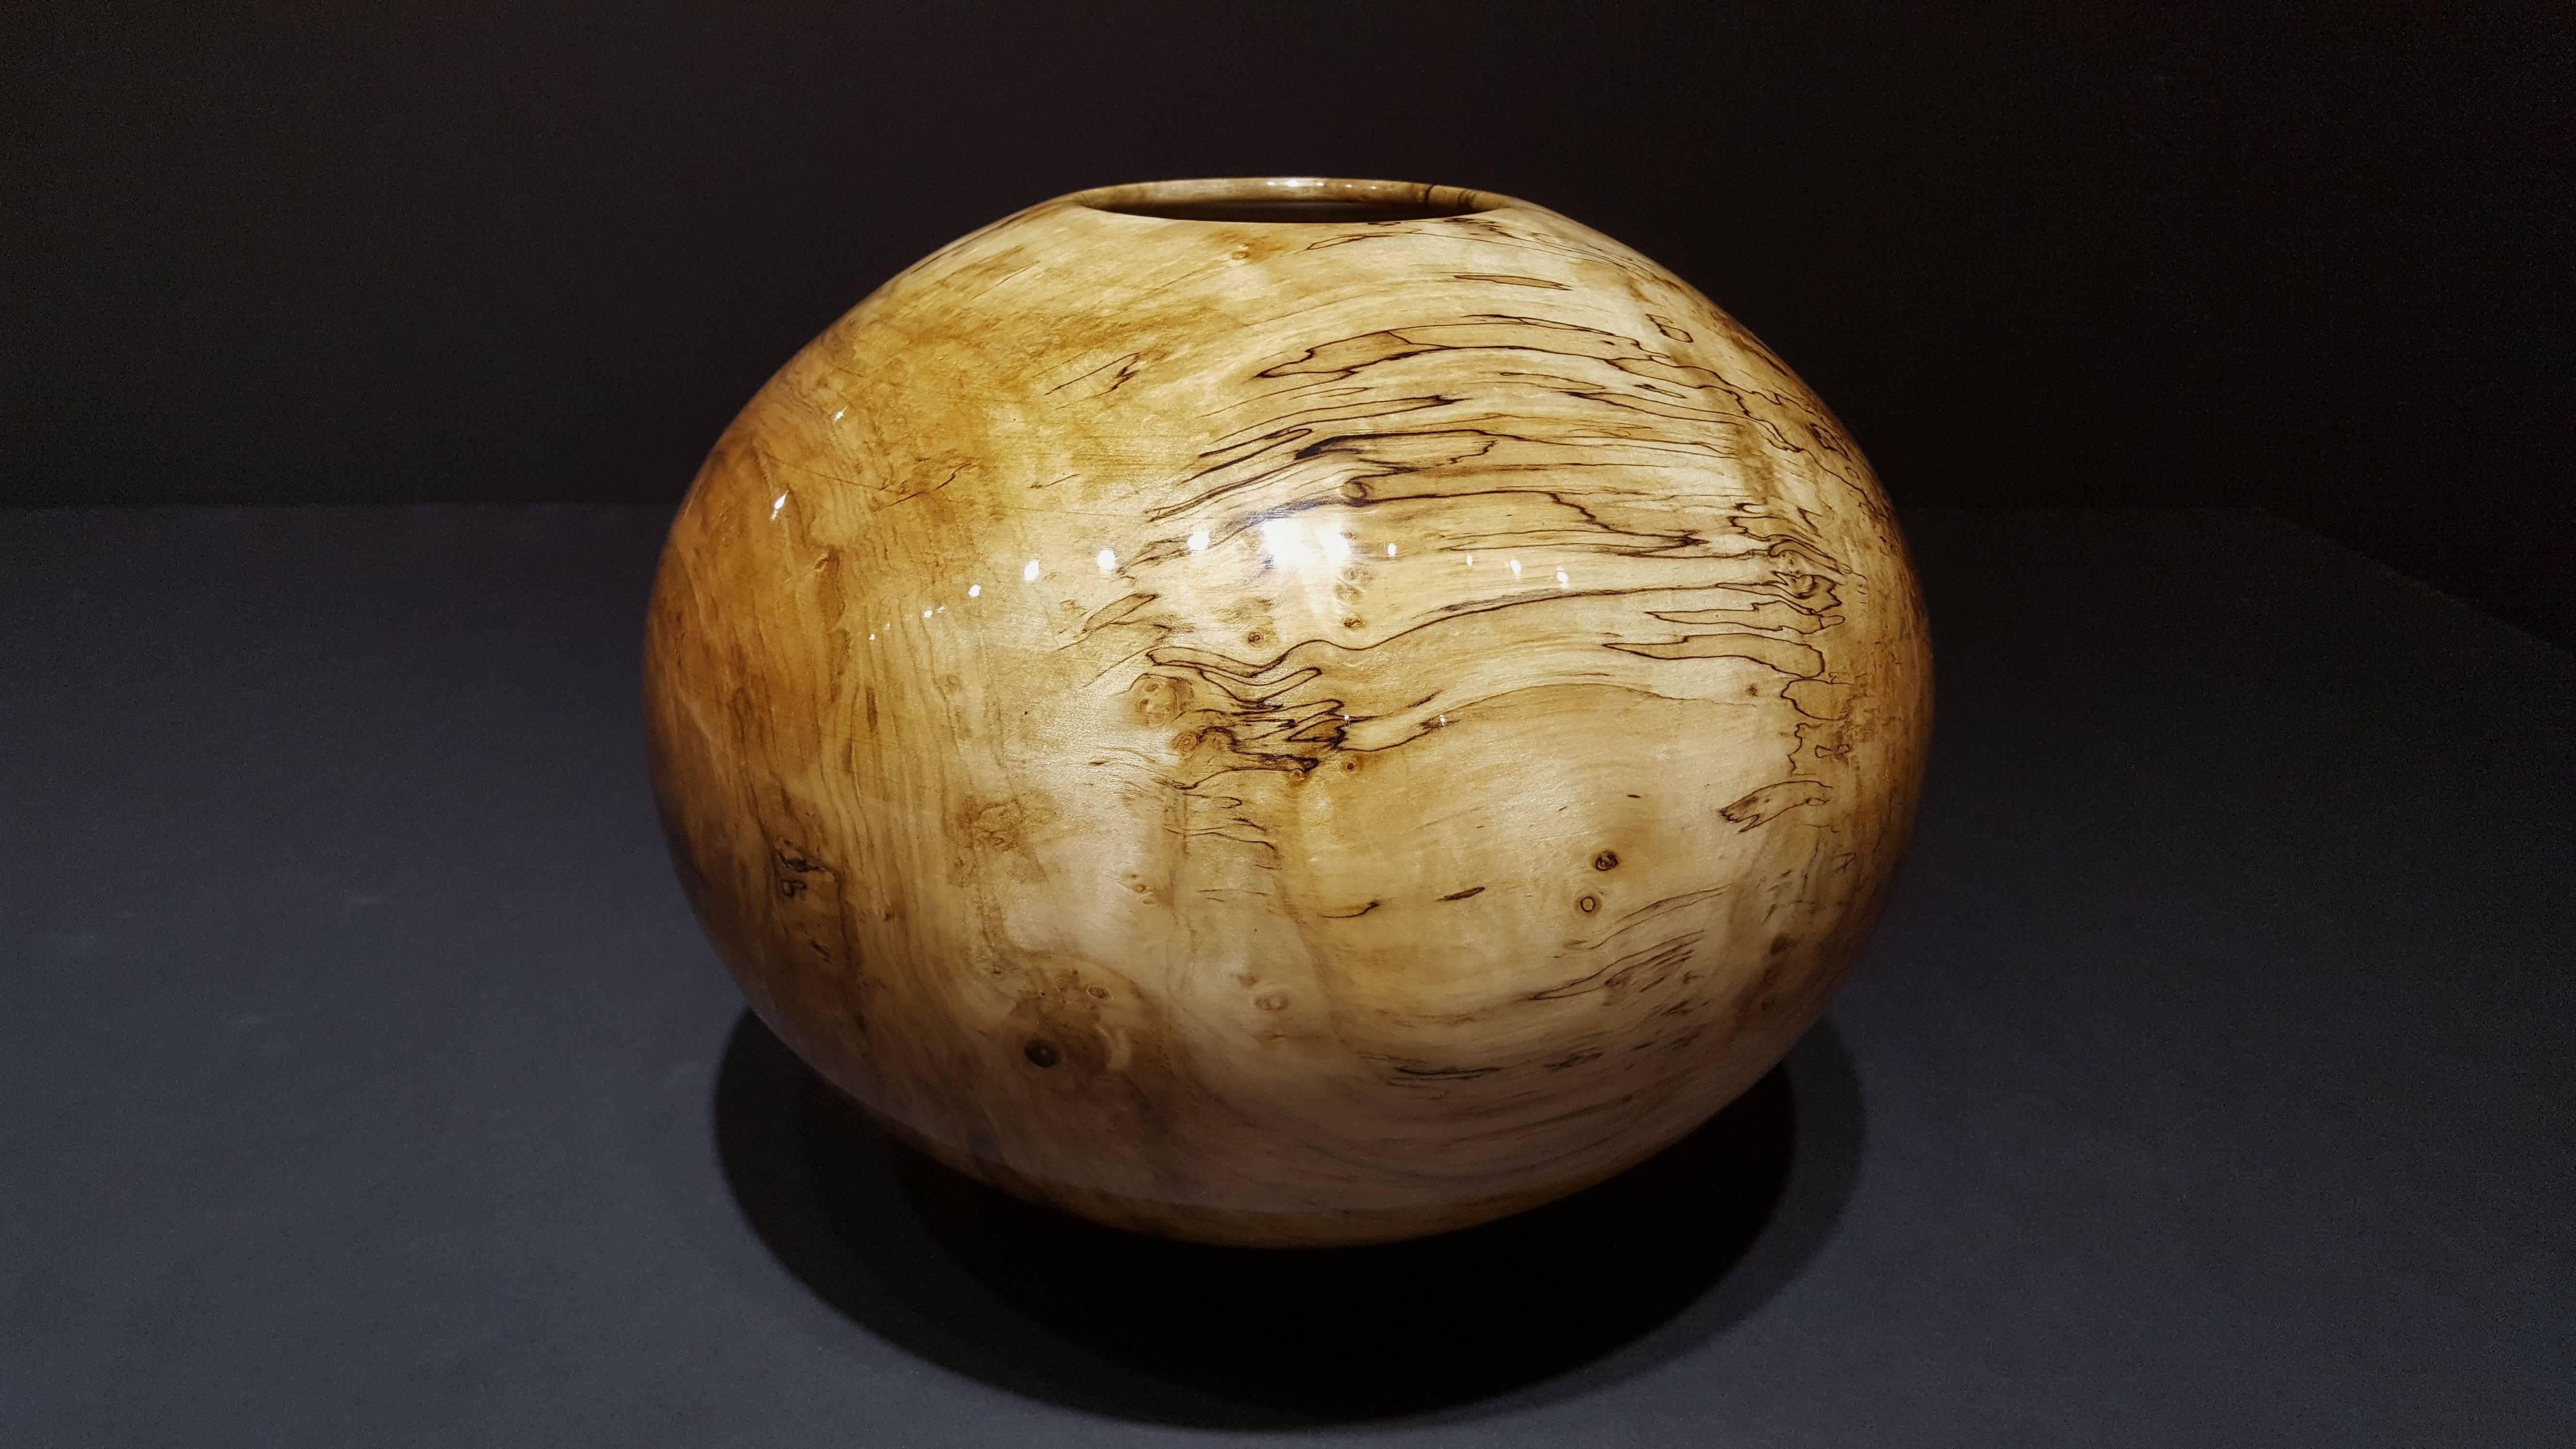 turned wood

Philip Moulthrop approaches his practice with the goal in mind to reveal the beauty and texture found in wood. He uses wood from trees native to his home in the southeastern United States. These are not exotic woods, however, they